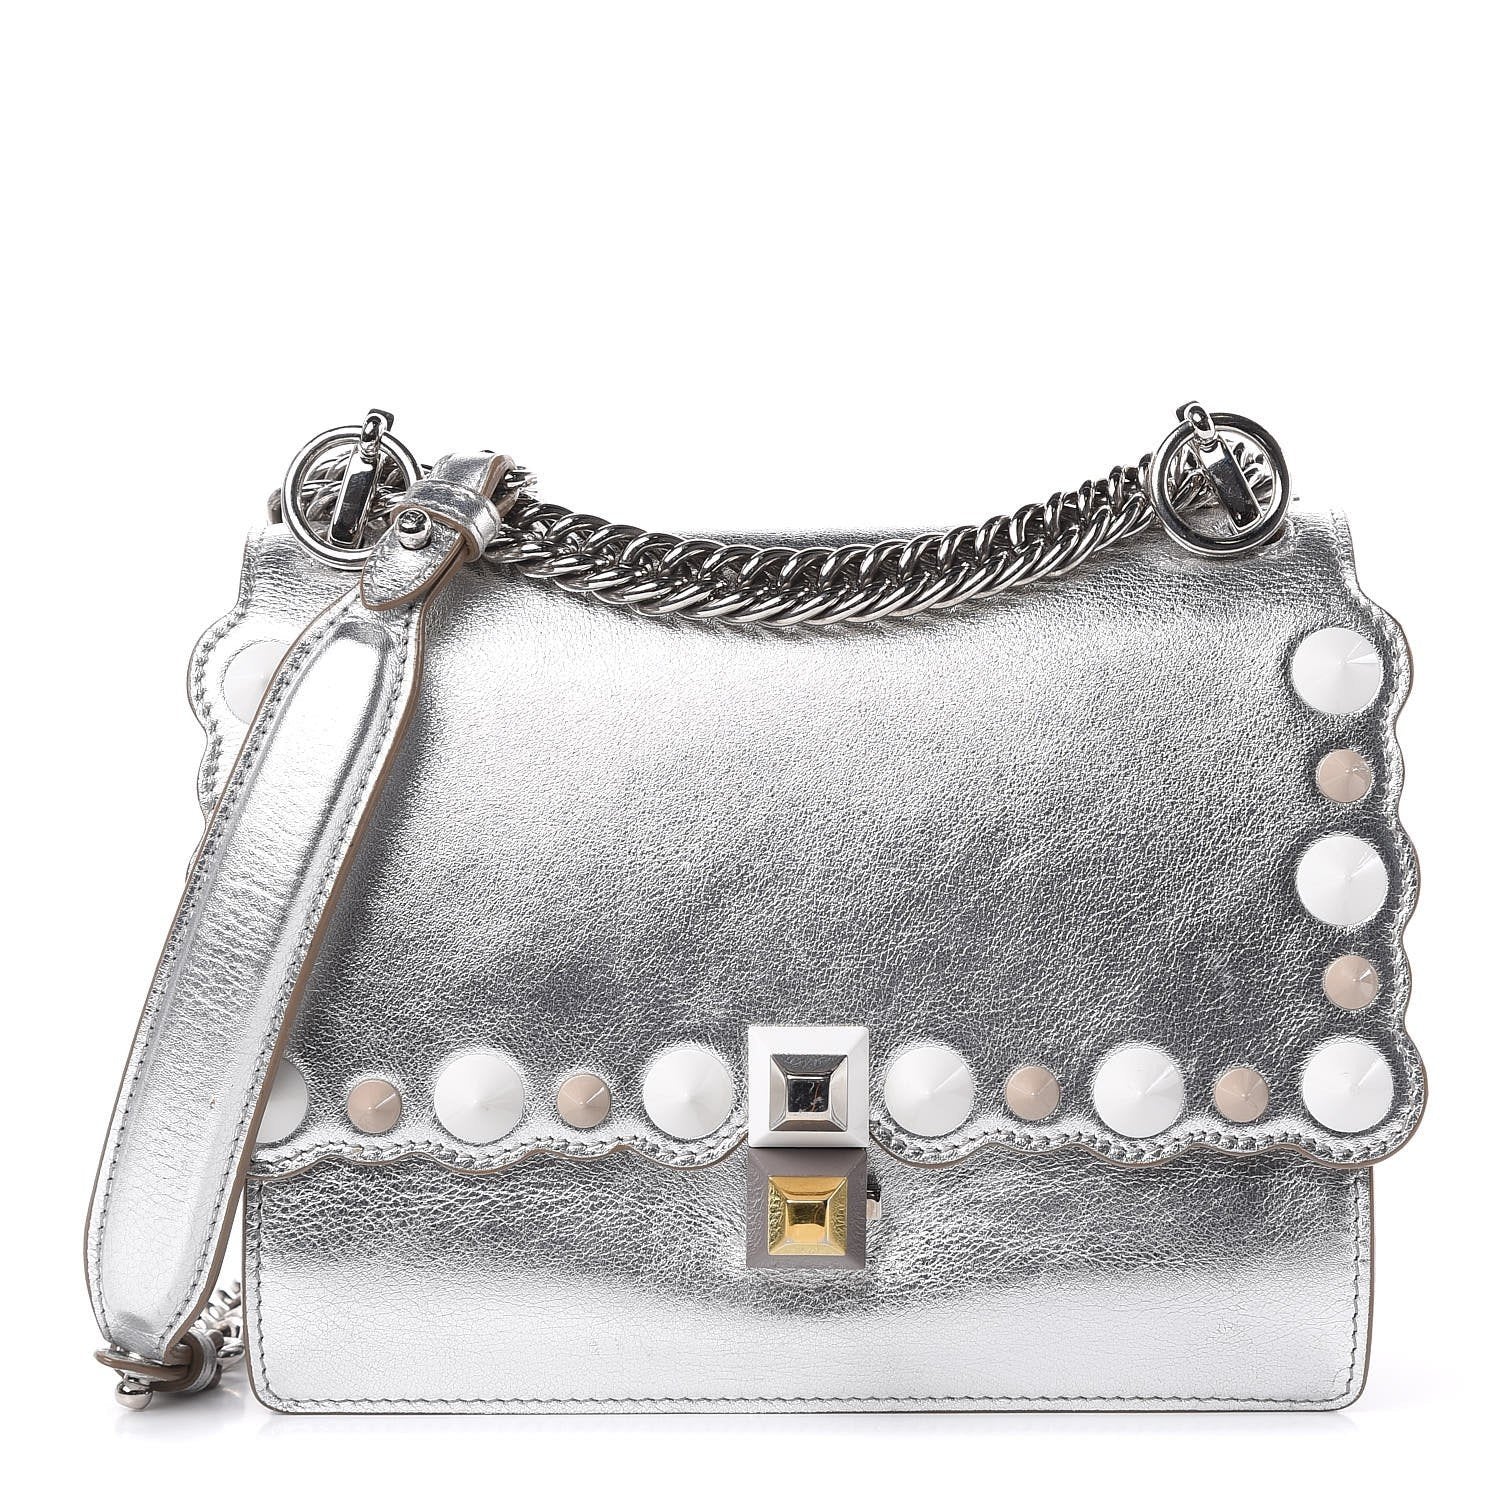 Fendi Kan I Metallic Silver Calfskin Scalloped Studded Small Shoulder Bag 8M0381 at_Queen_Bee_of_Beverly_Hills